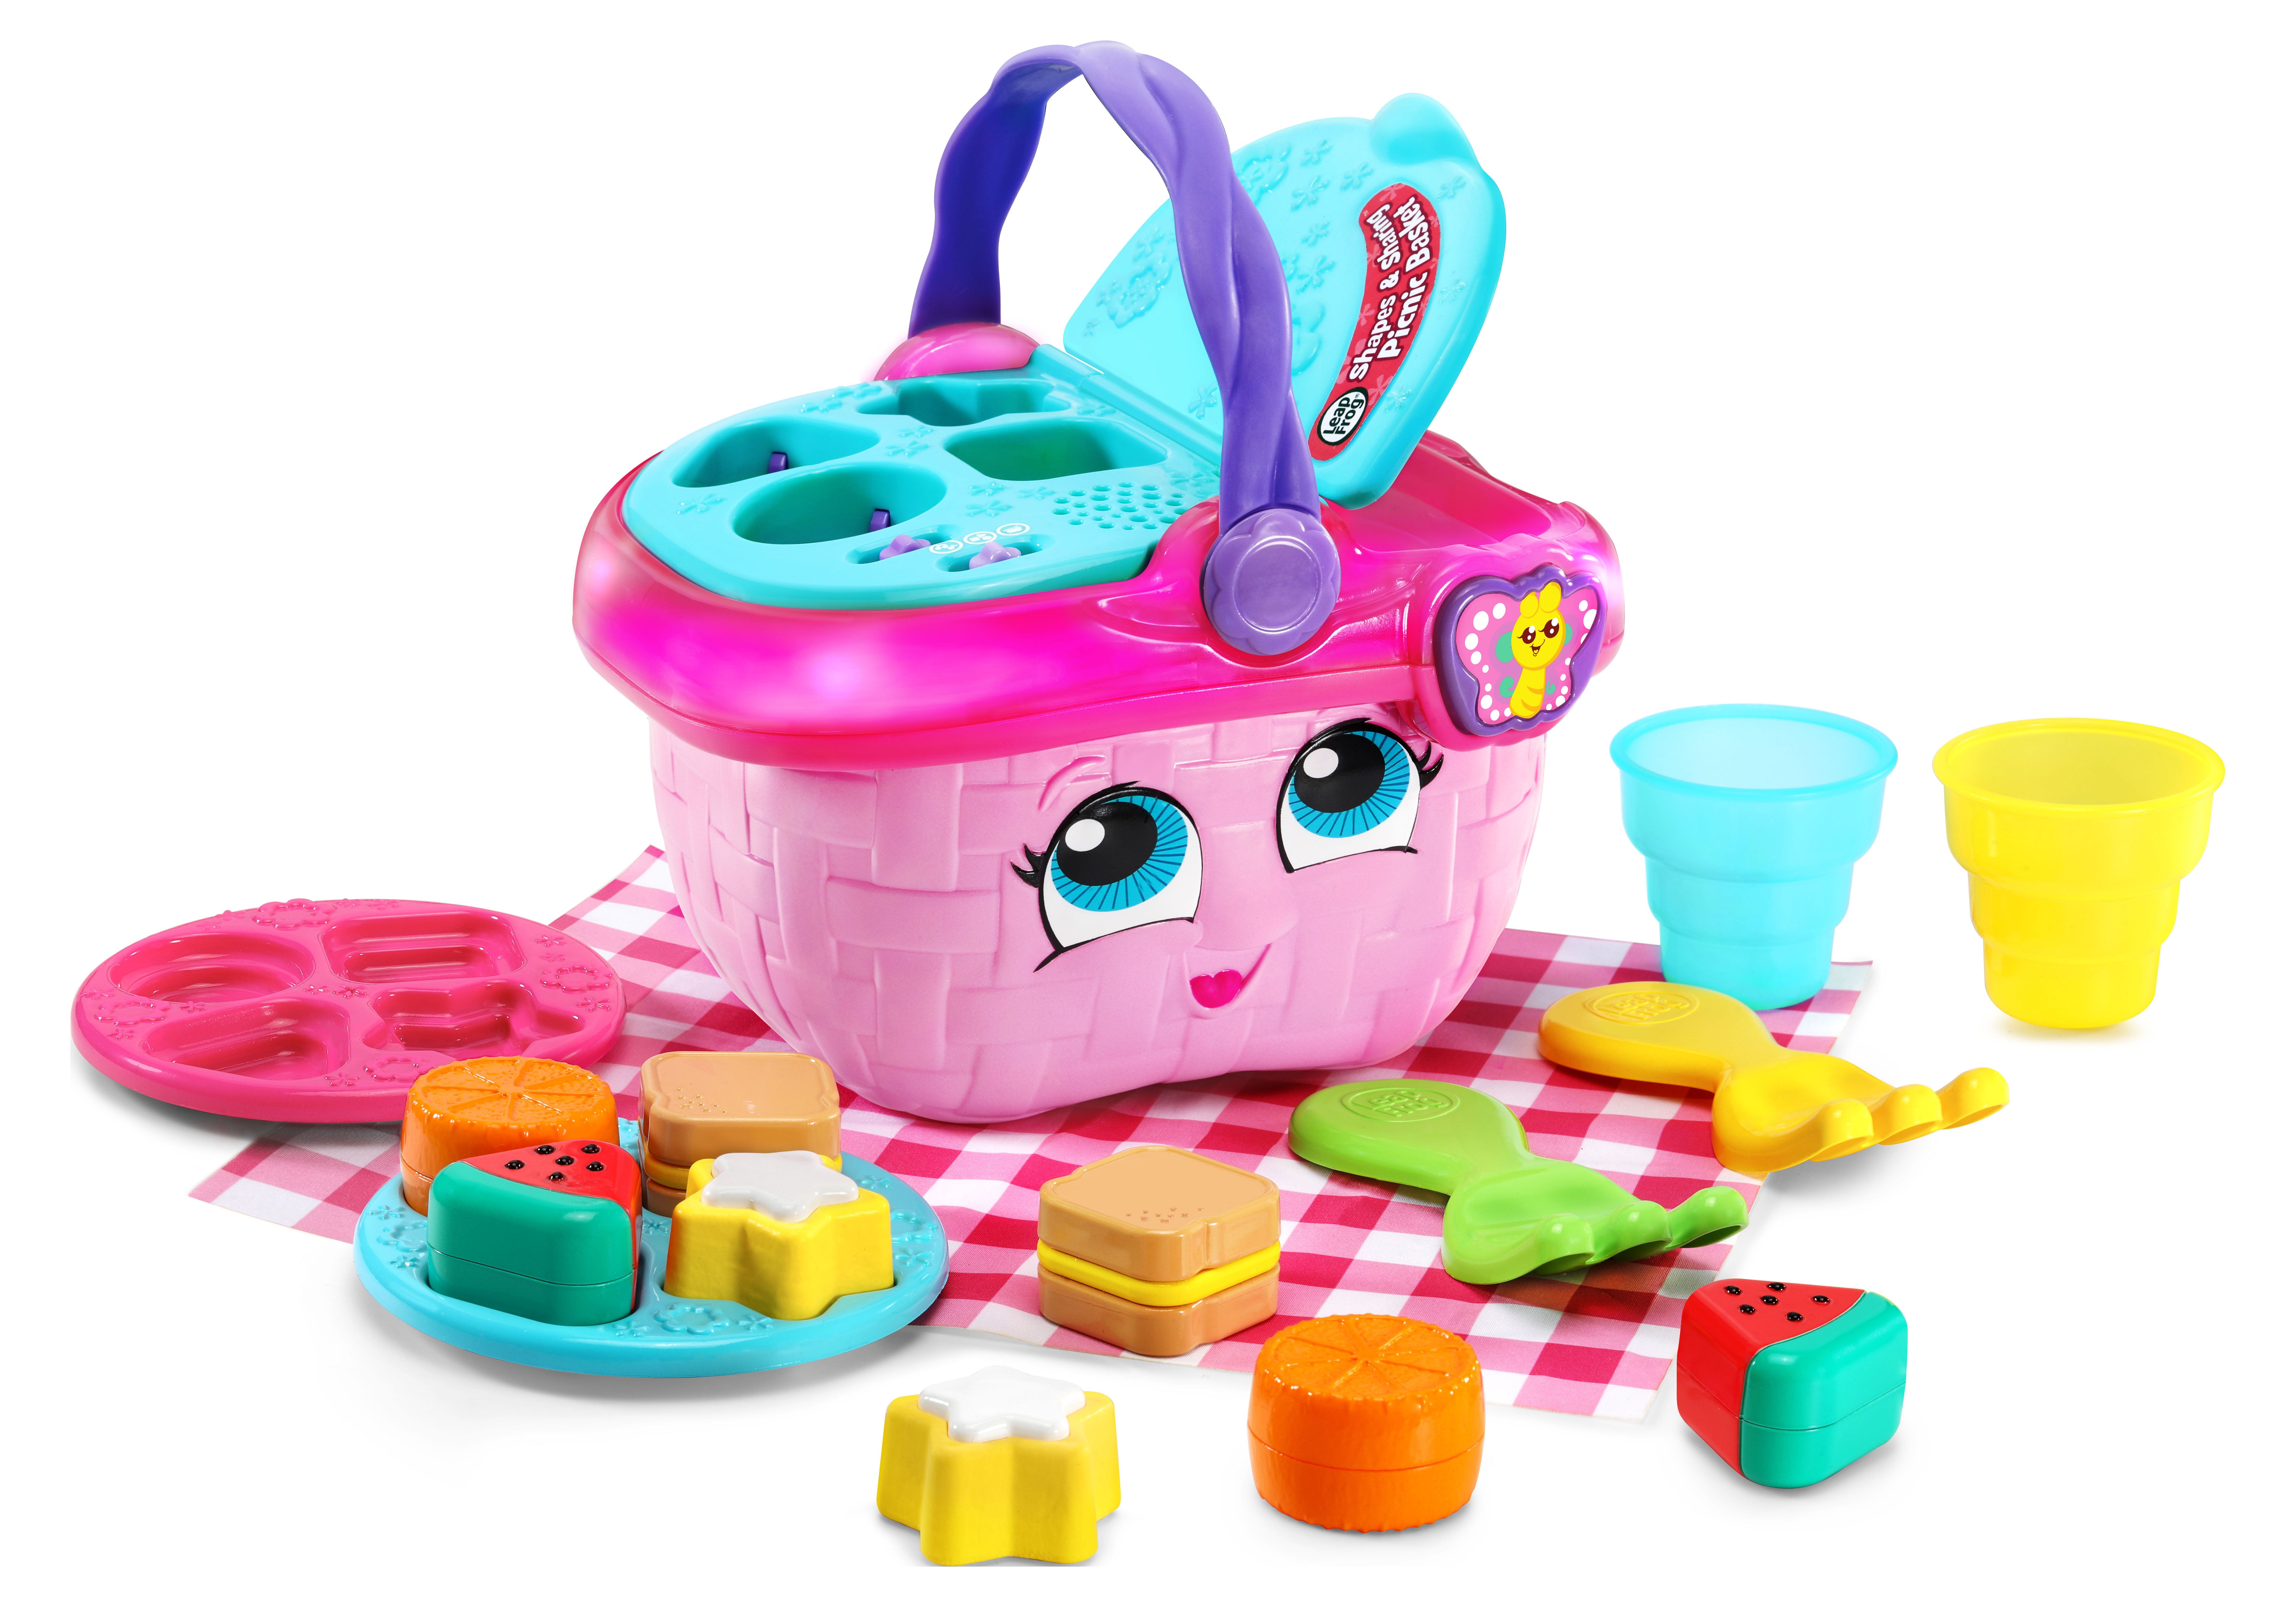 LeapFrog Shapes and Sharing Picnic Basket, Multicolor Role Play Toy for Infants - image 1 of 12